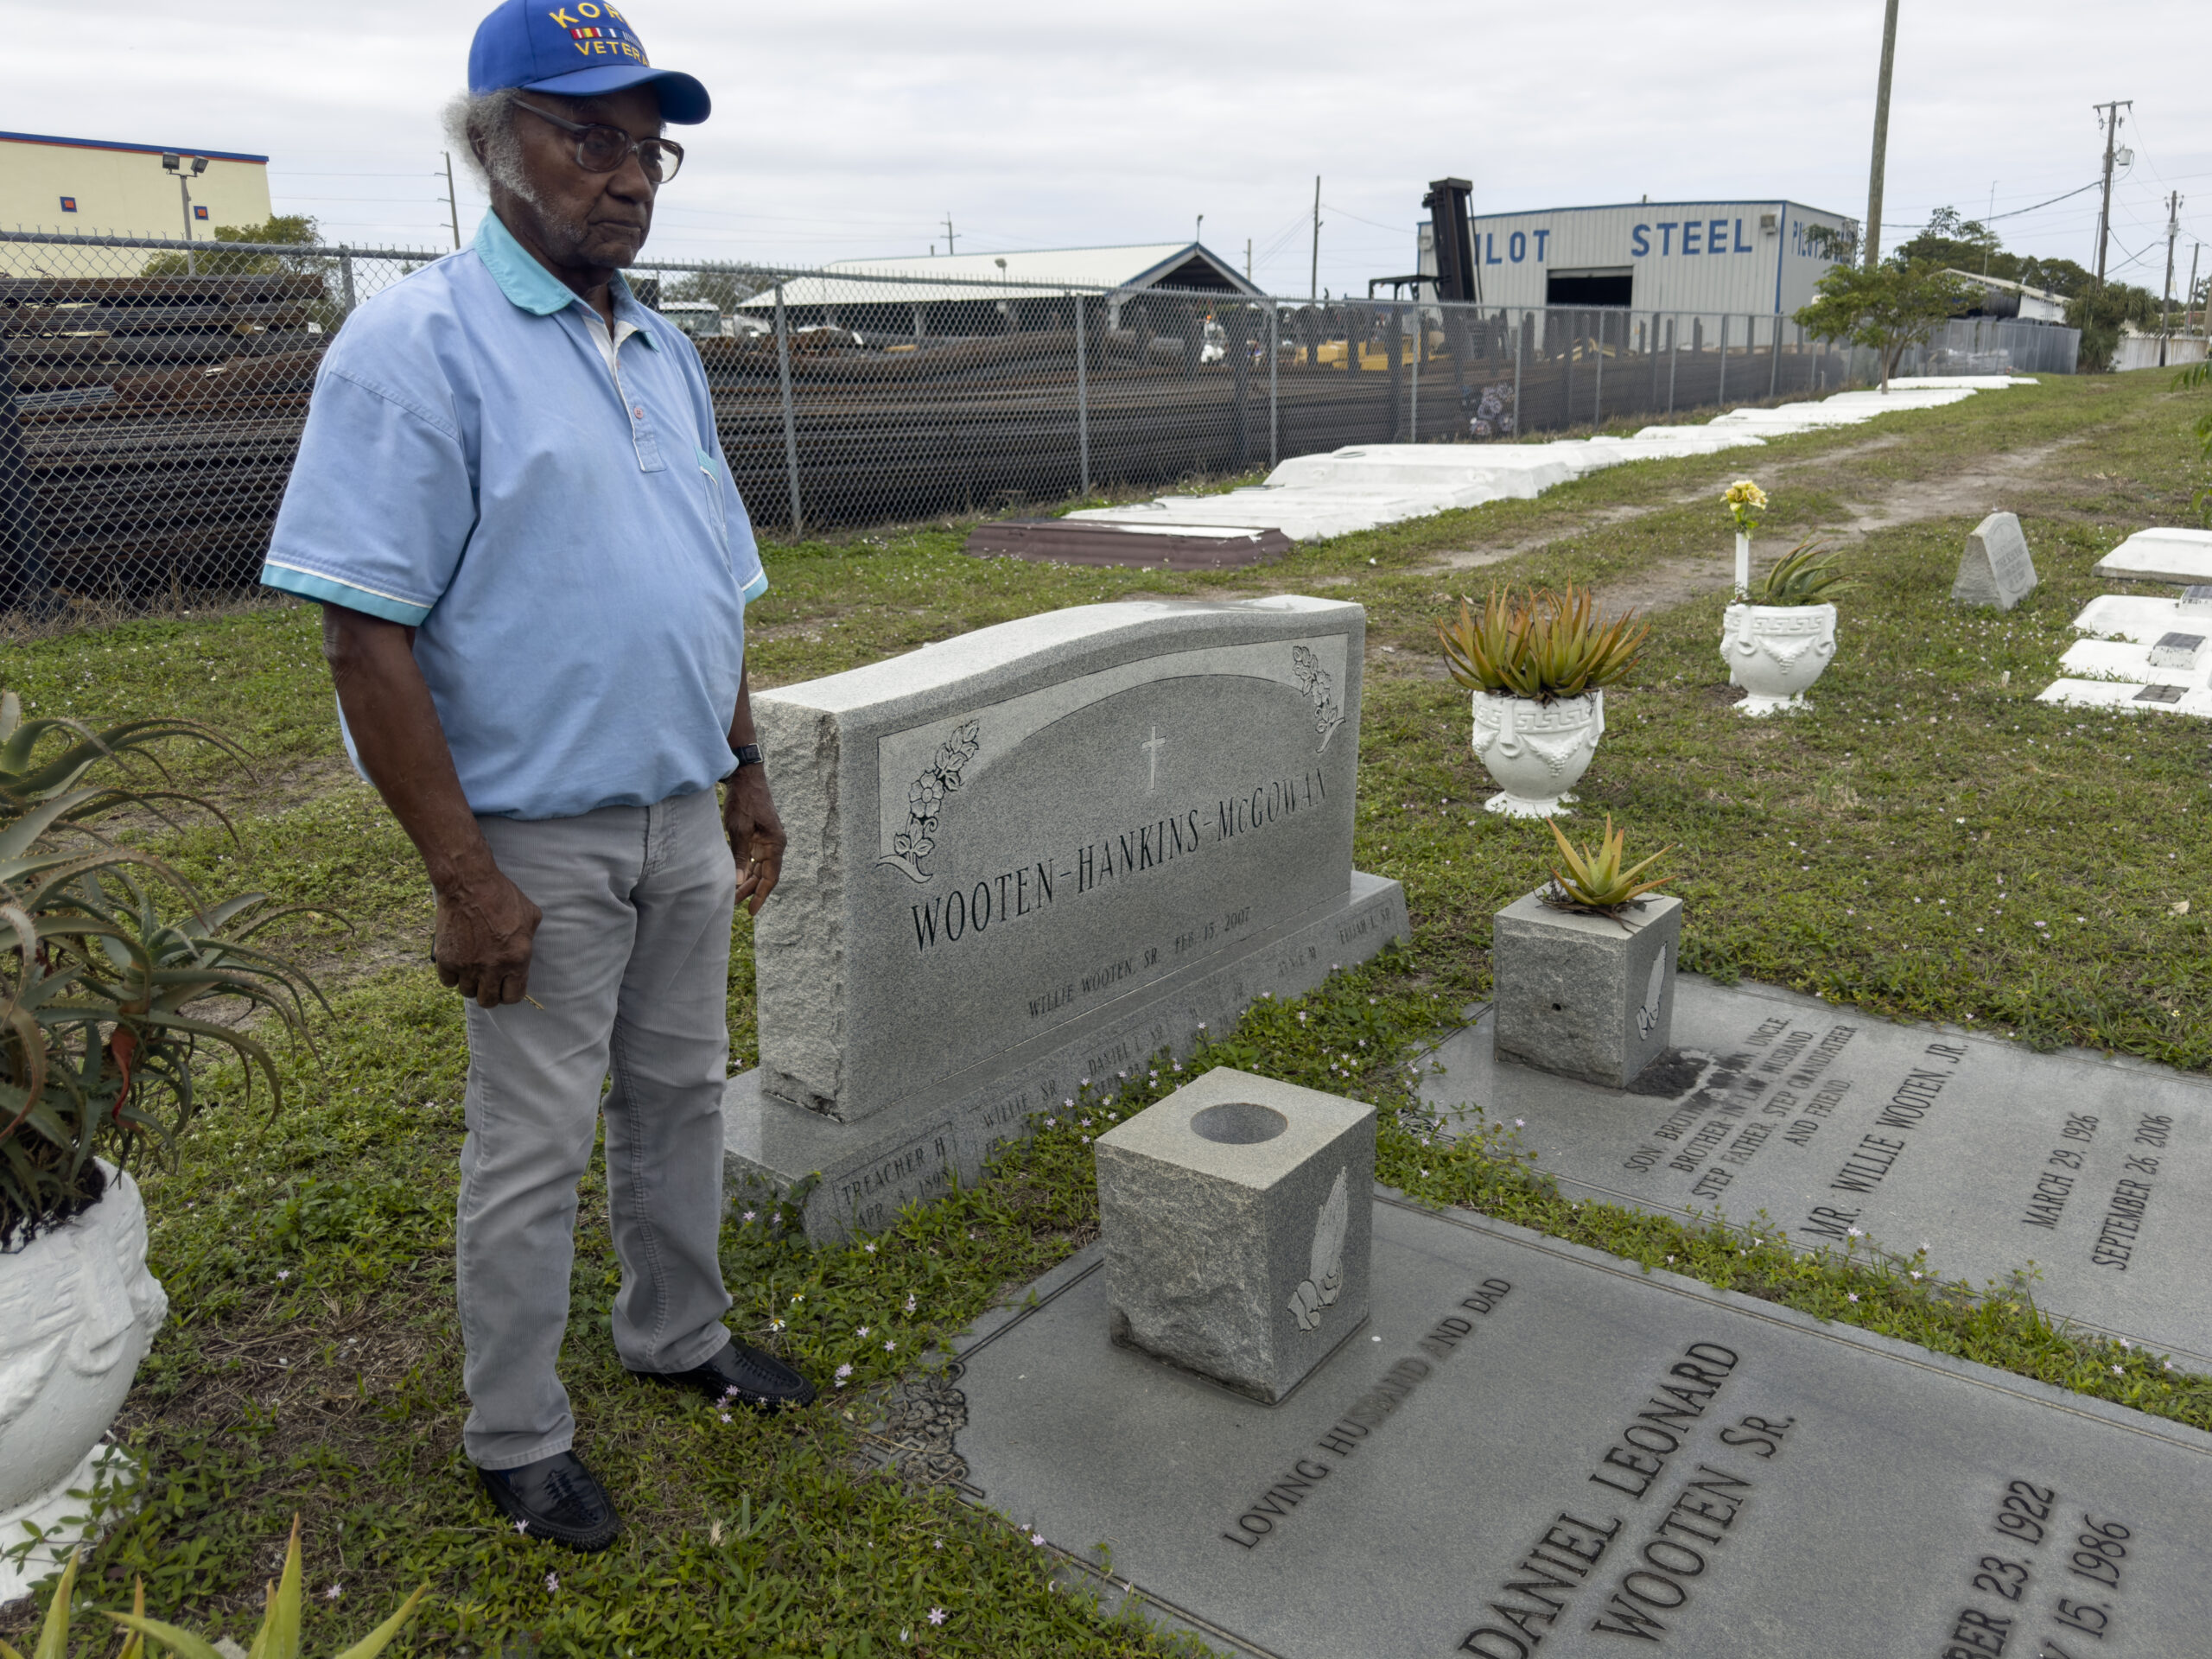 Florida residents are in court over a cemetery’s future